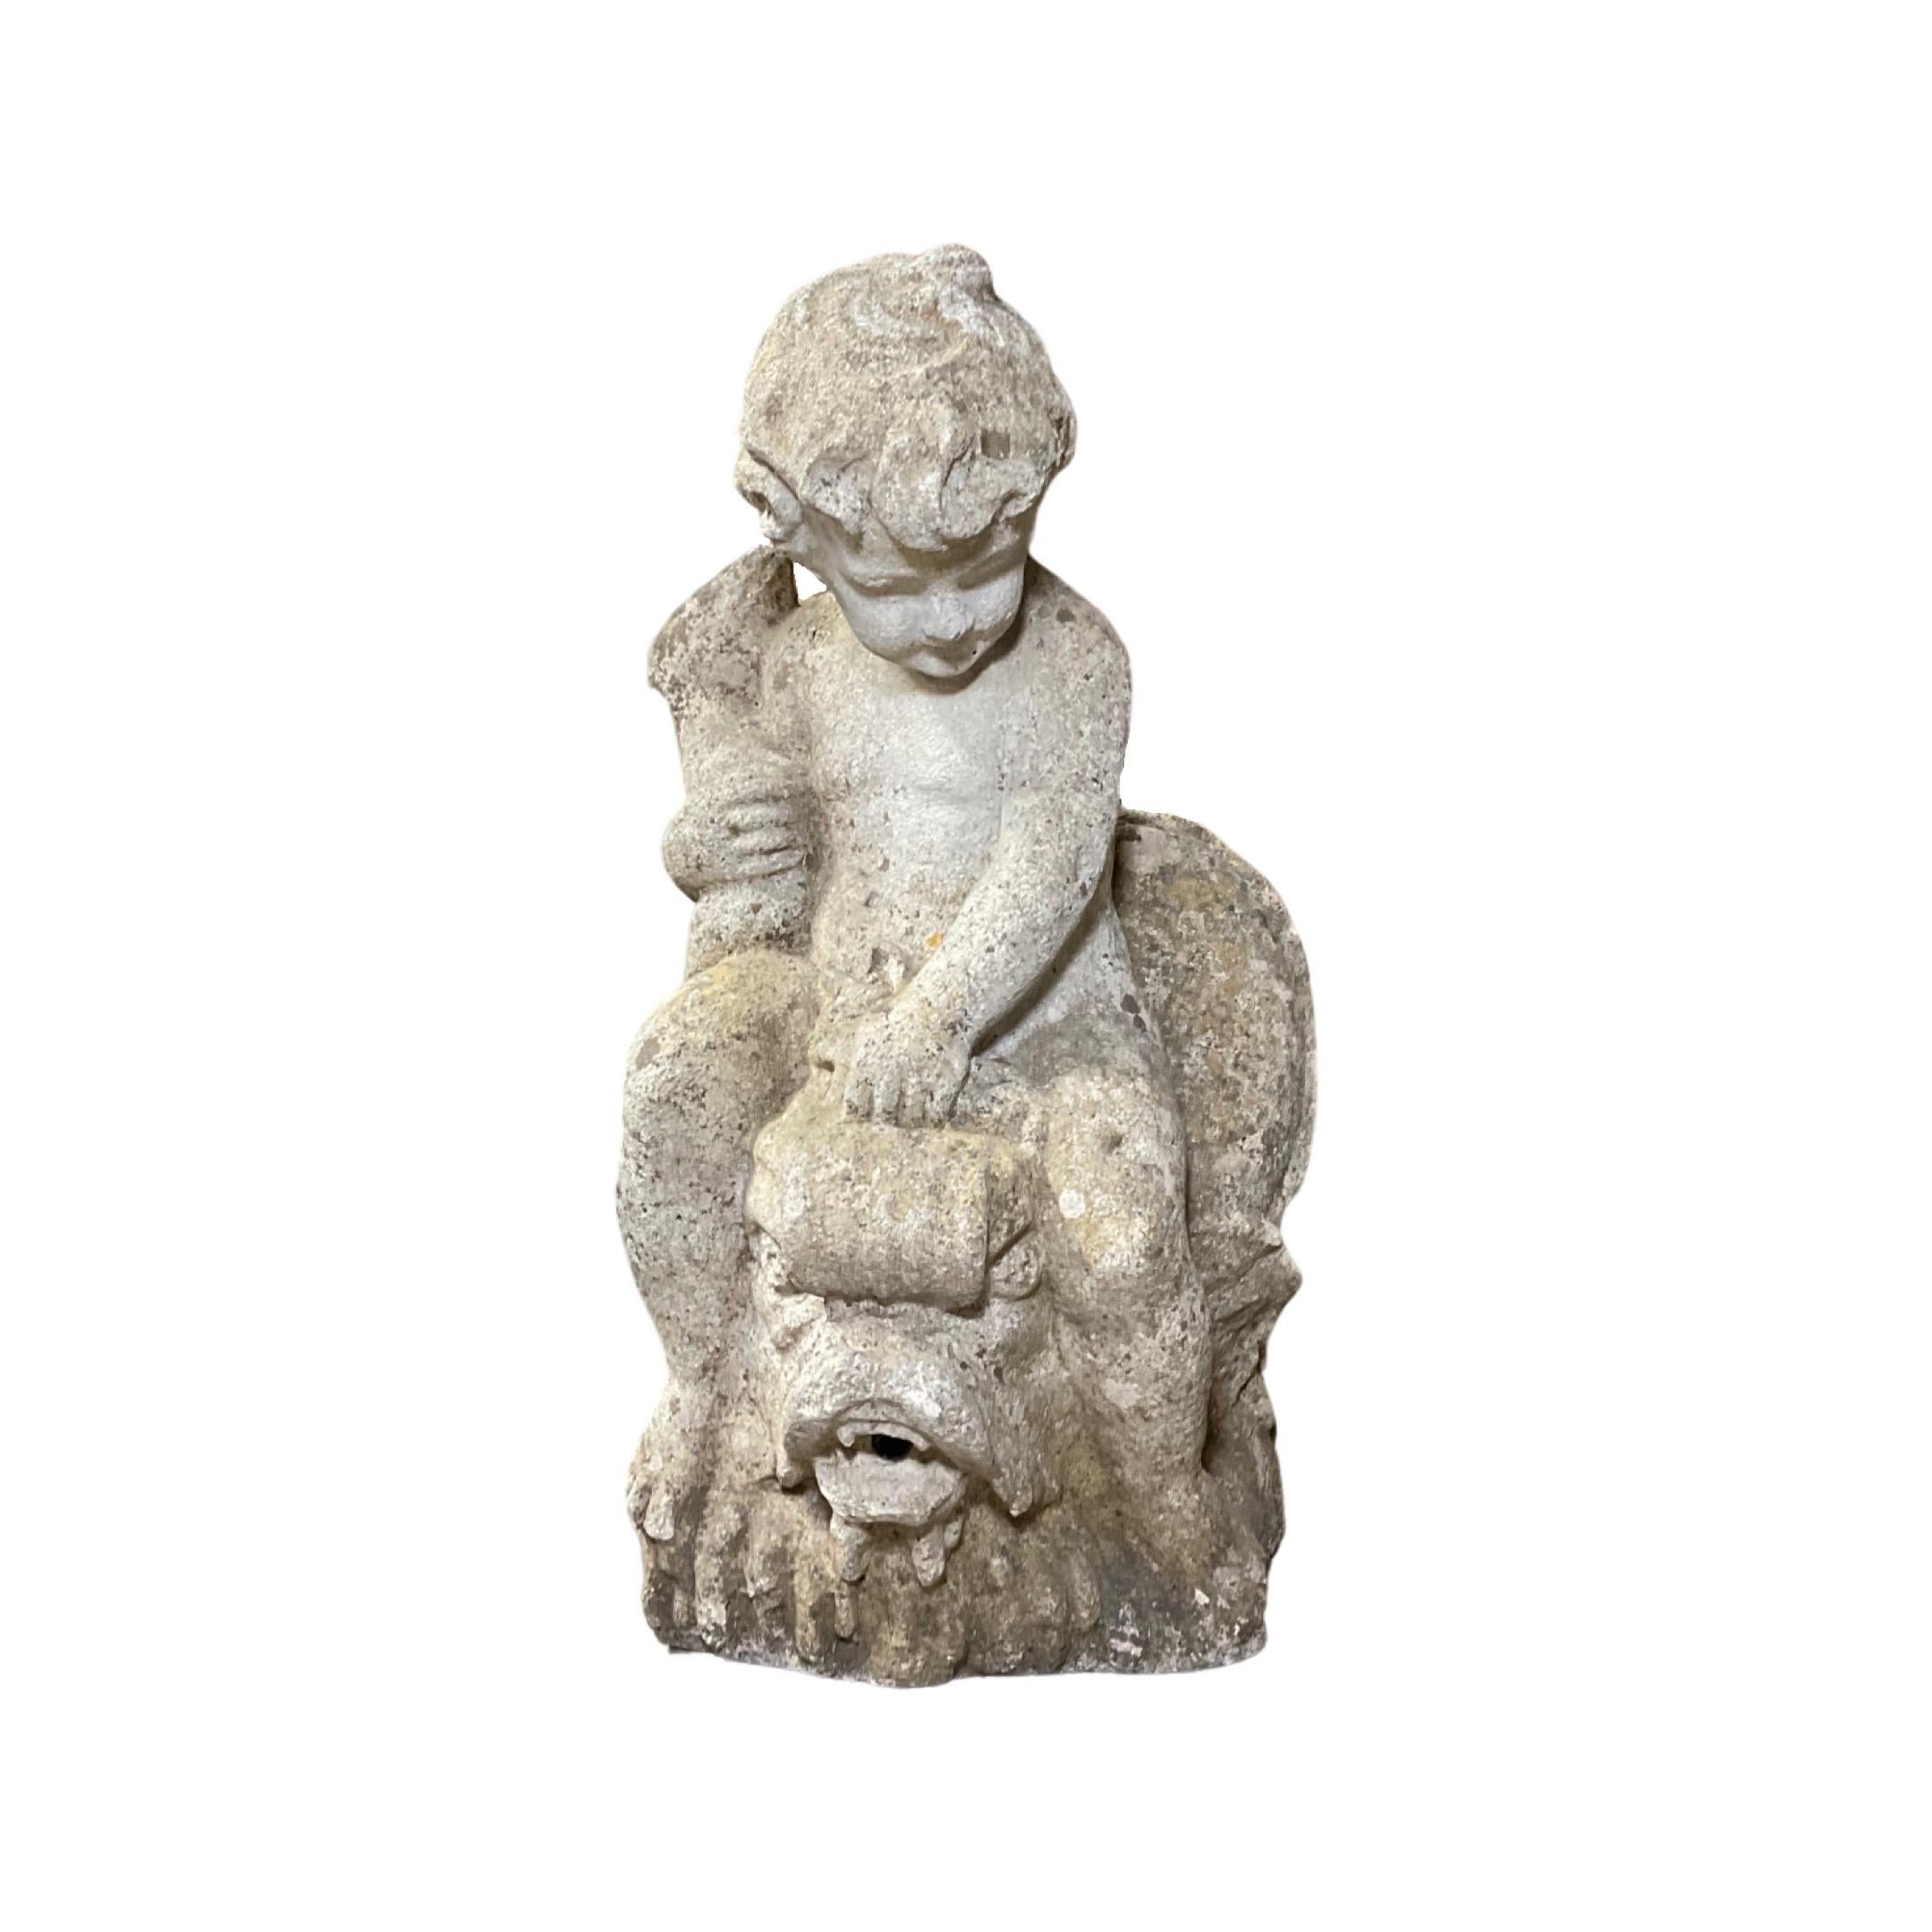 A beautiful French Limestone Cherub Fountain Head Water Exit from 1950. Hand-carved with exquisite detail, this unique piece features a cherub on a fish creature and will add an air of elegance to any outdoor space. Make a statement with this